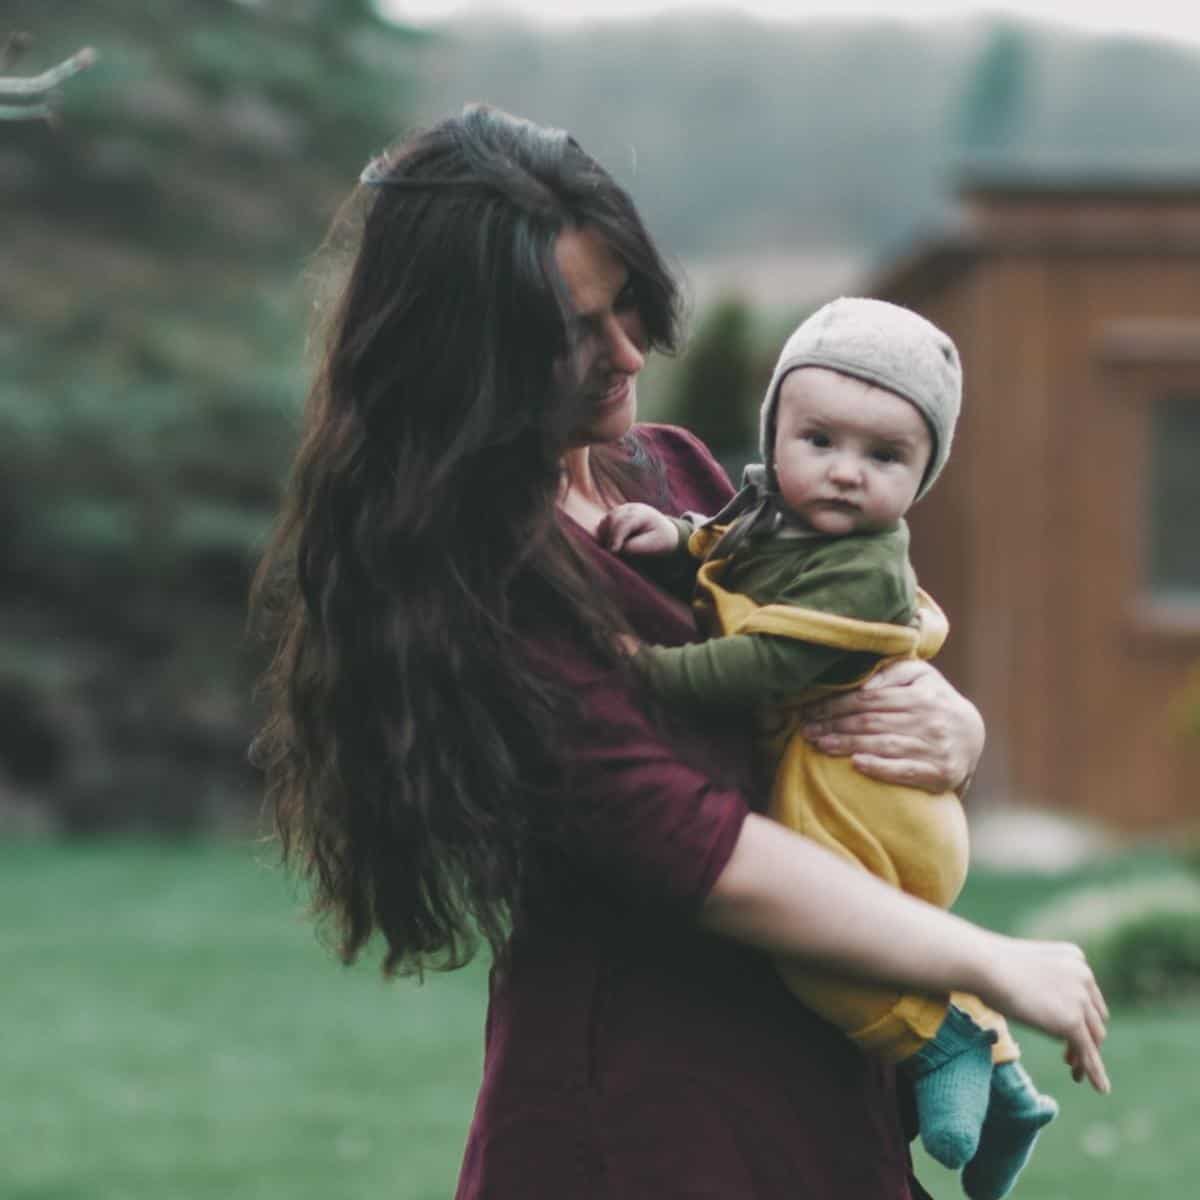 A woman with long dark hair wearing a dress is holding a baby boy.